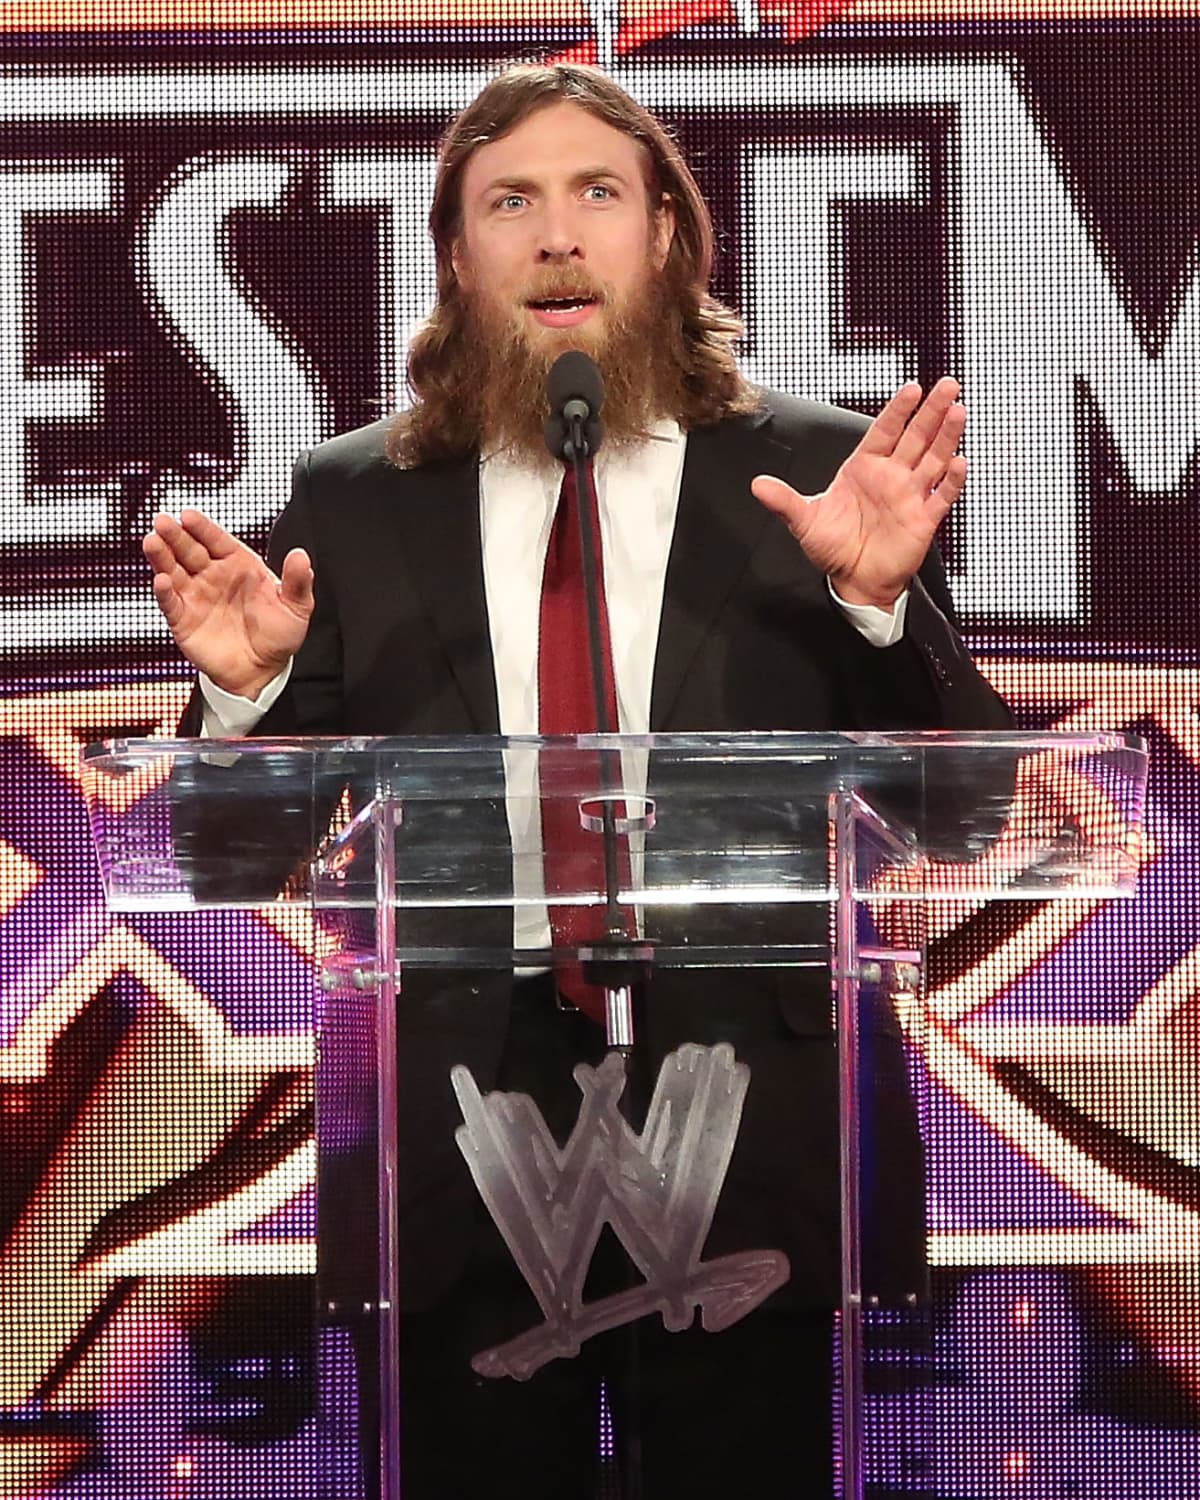 NEW YORK, NY - APRIL 01:  Daniel Bryan attends the WrestleMania 30 press conference at the Hard Rock Cafe New York on April 1, 2014 in New York City.  (Photo by Taylor Hill/WireImage)